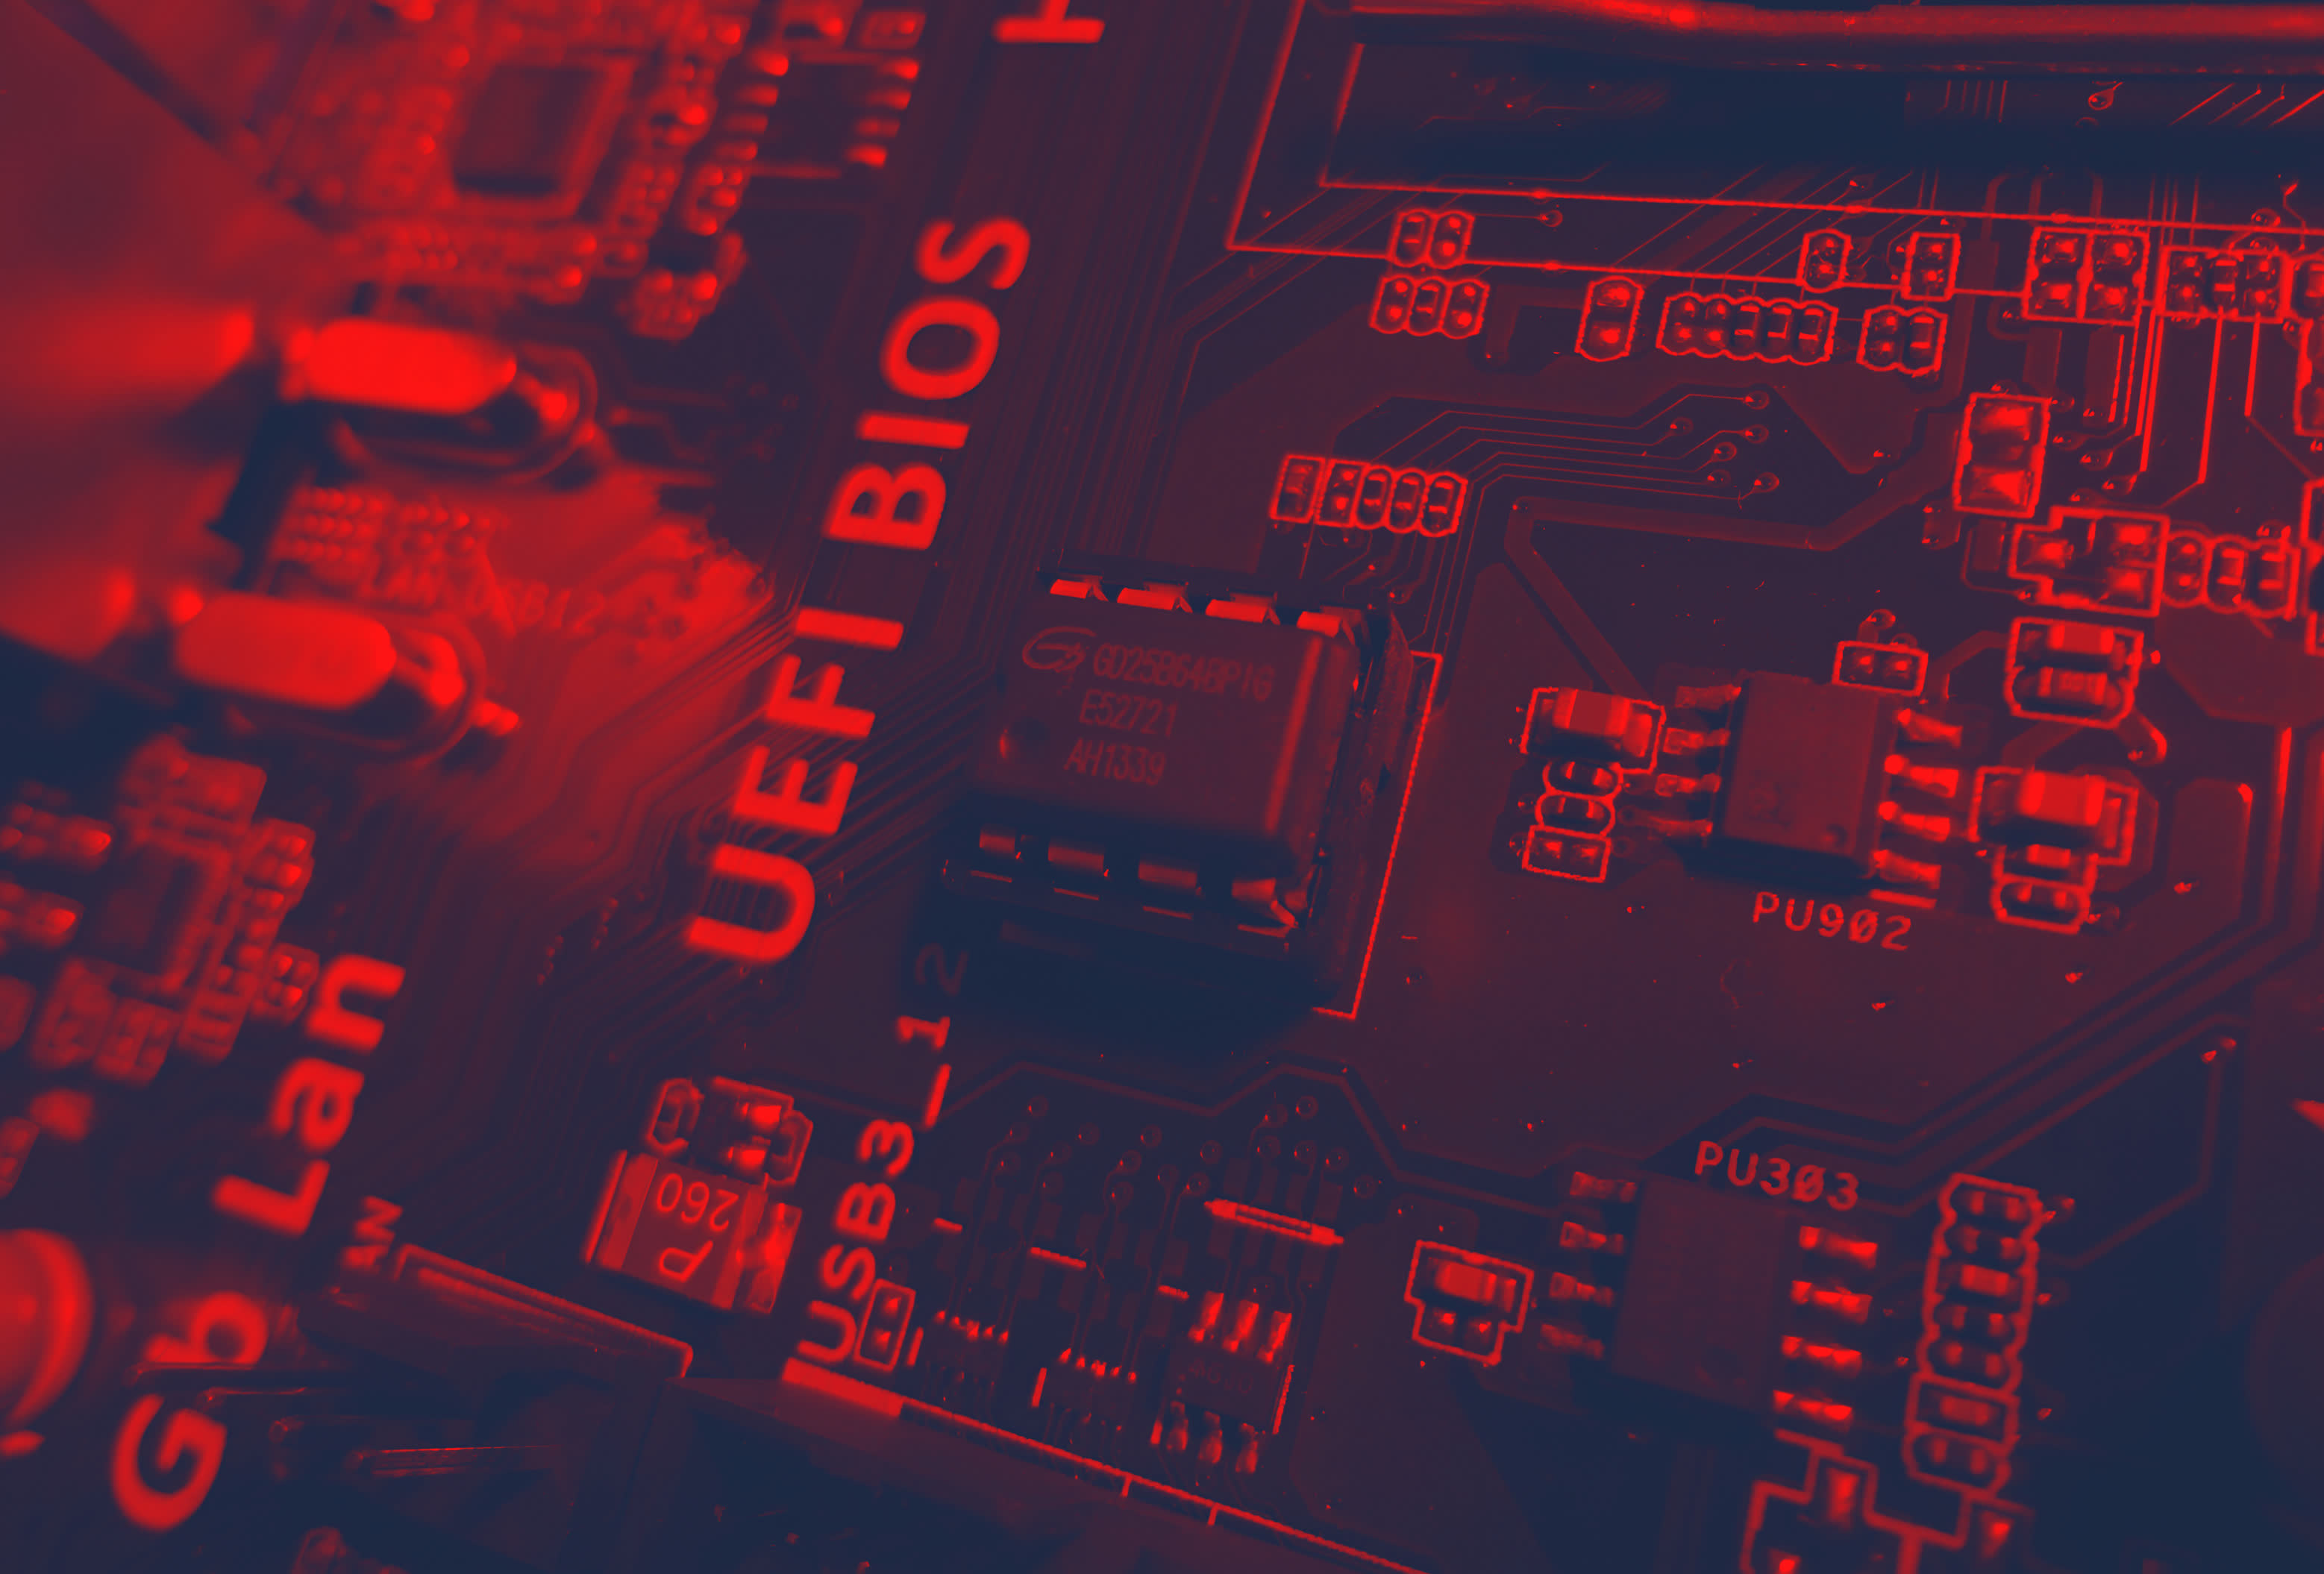 For years, some Gigabyte and Asus motherboards carried UEFI malware |  TechSpot